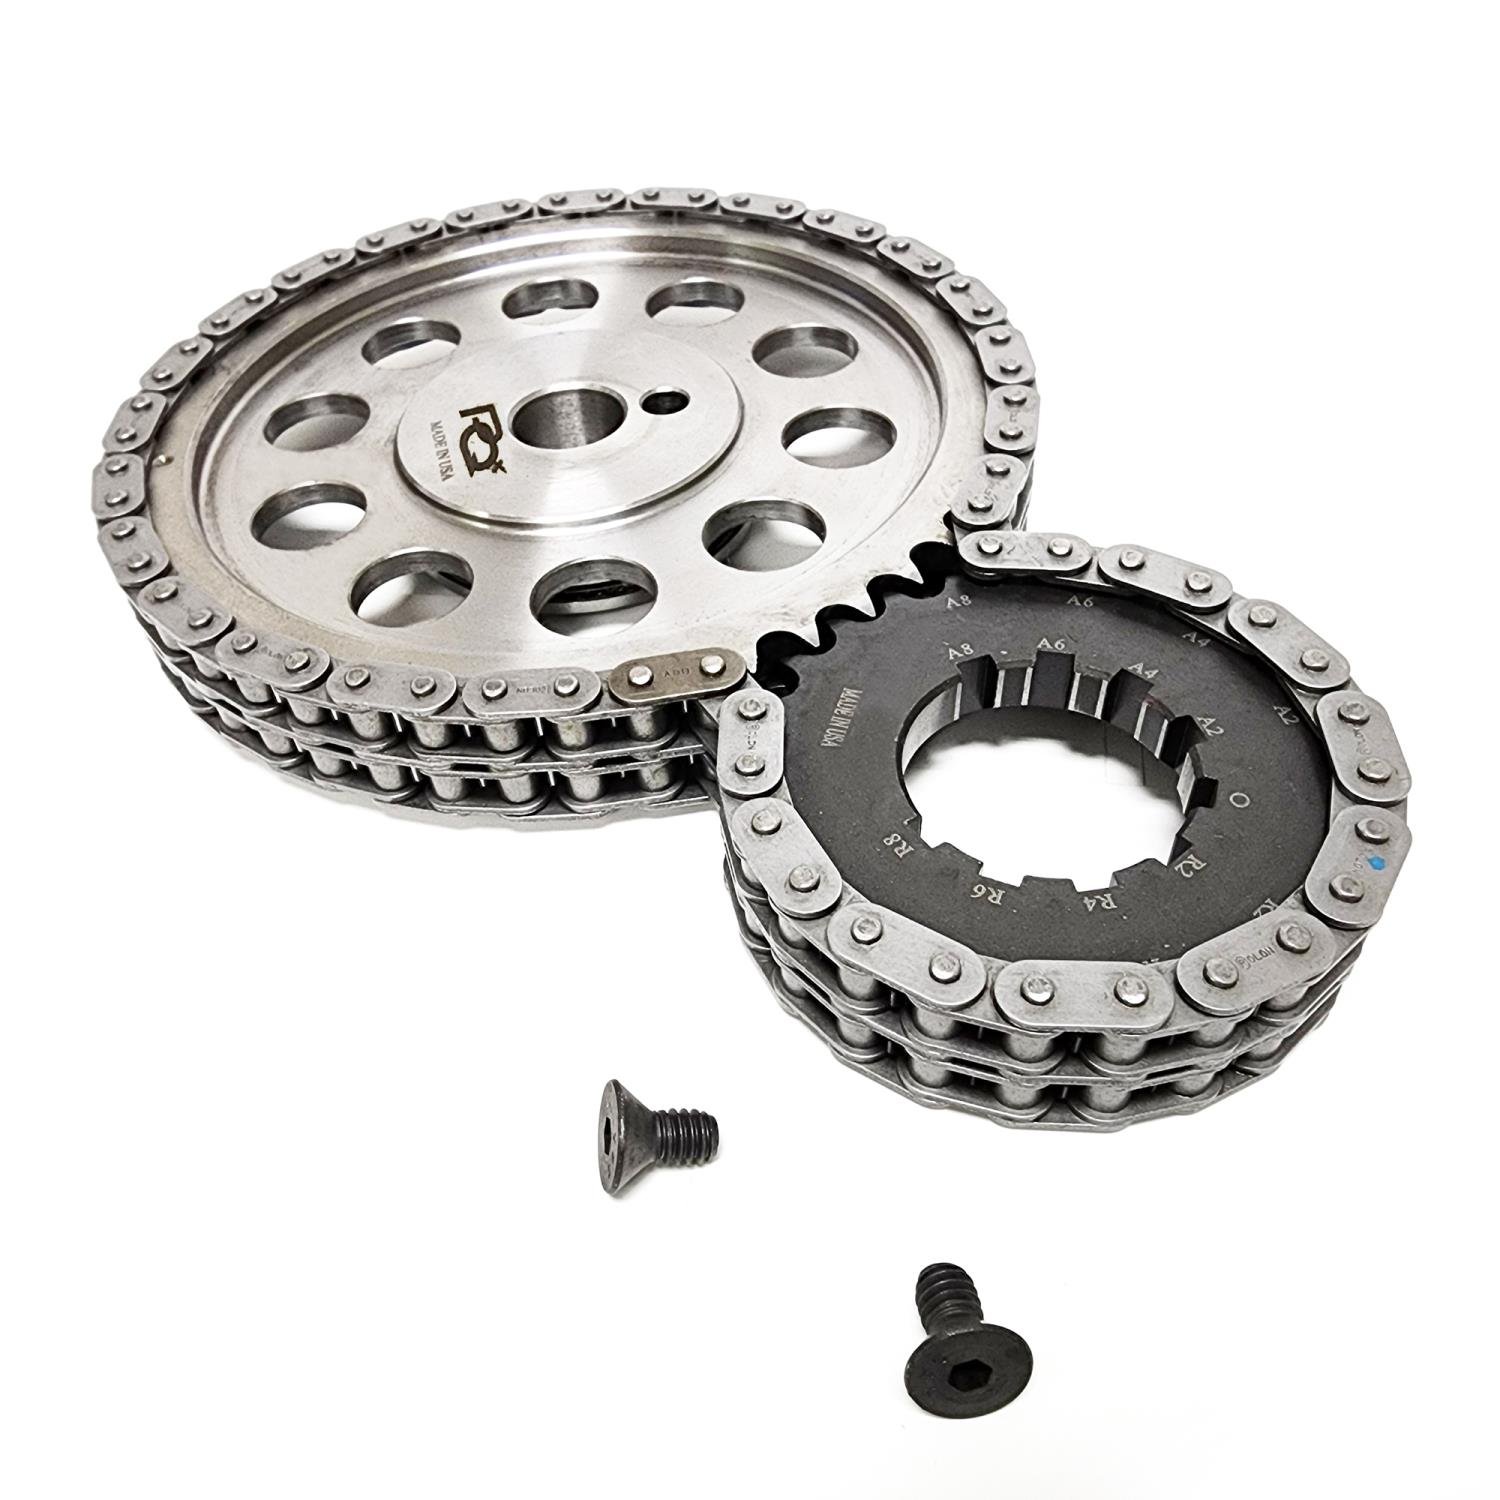 Double-Roller Timing Chain and Gear Set for Ford FE 330/352/390/427/428